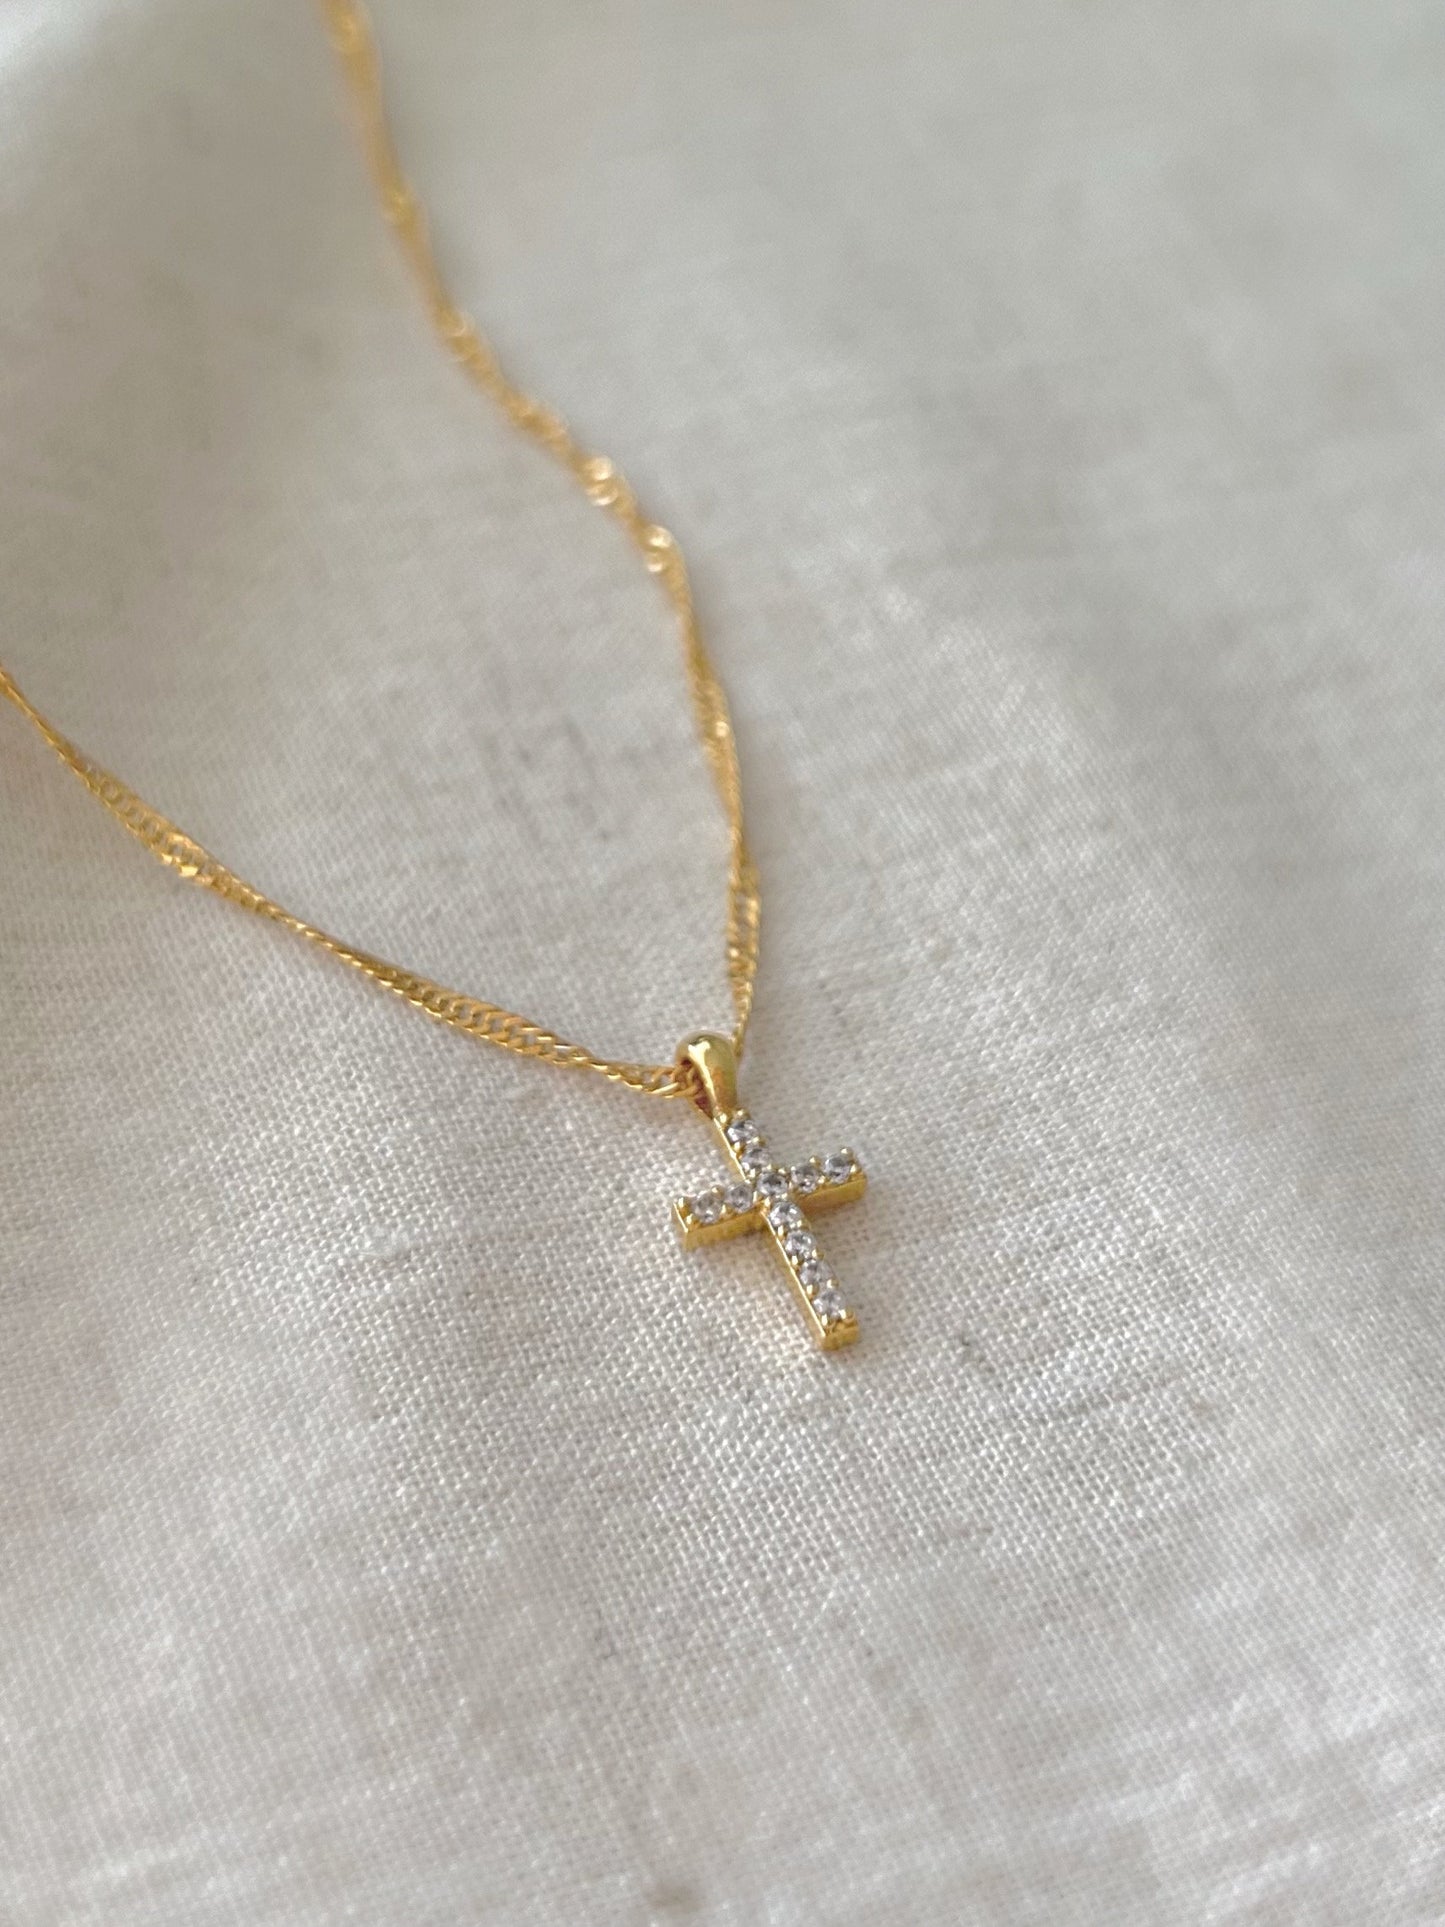 Cross necklace women, sideways cross necklace, gold cross necklace, dainty jewelry, gifts for her, gift for women, necklaces for women